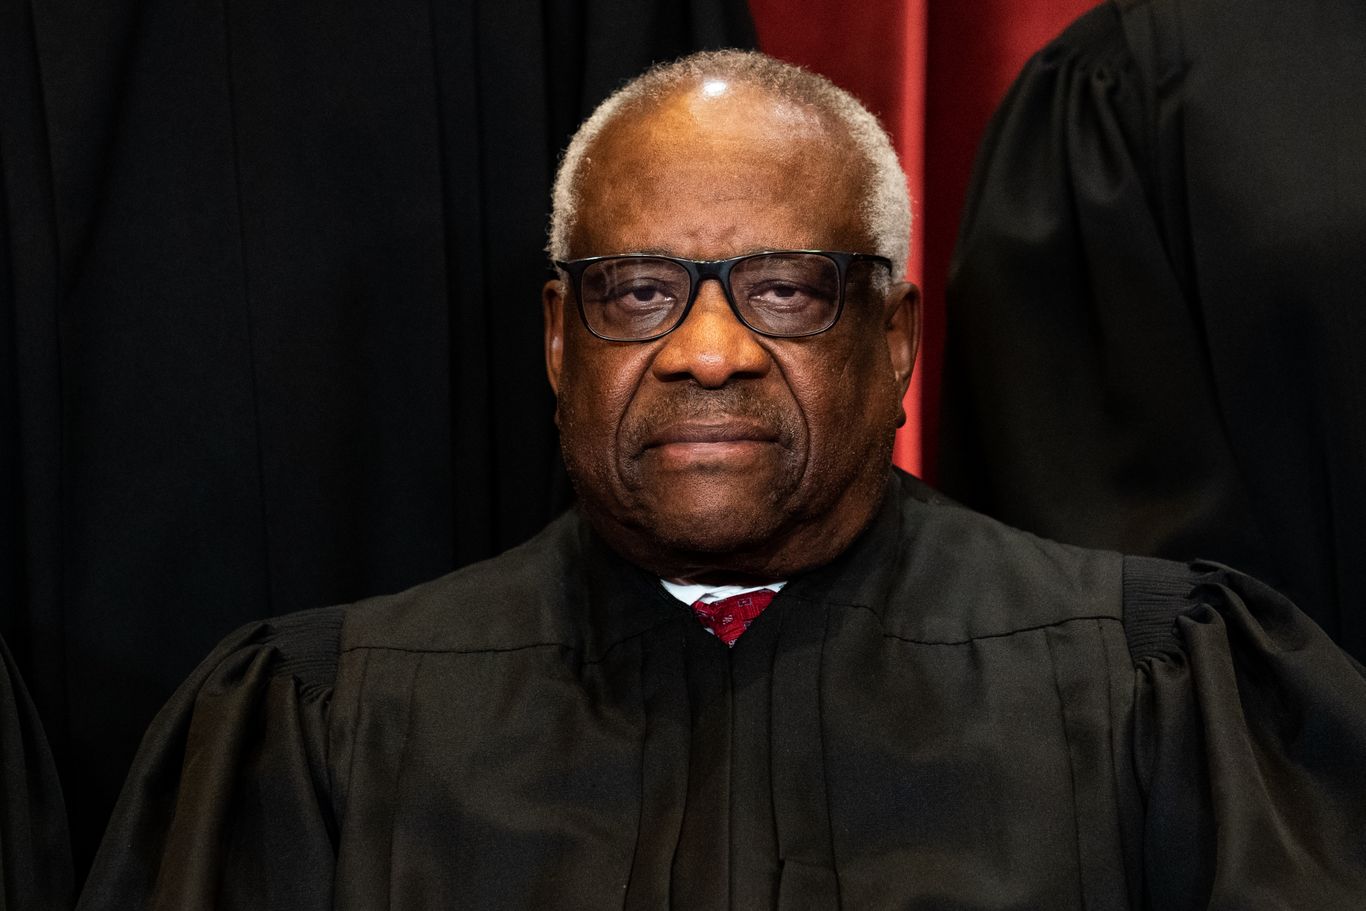 George Washington University Rejects Online Petition to Fire Clarence Thomas for Supreme Court Ruling Overturning Abortion